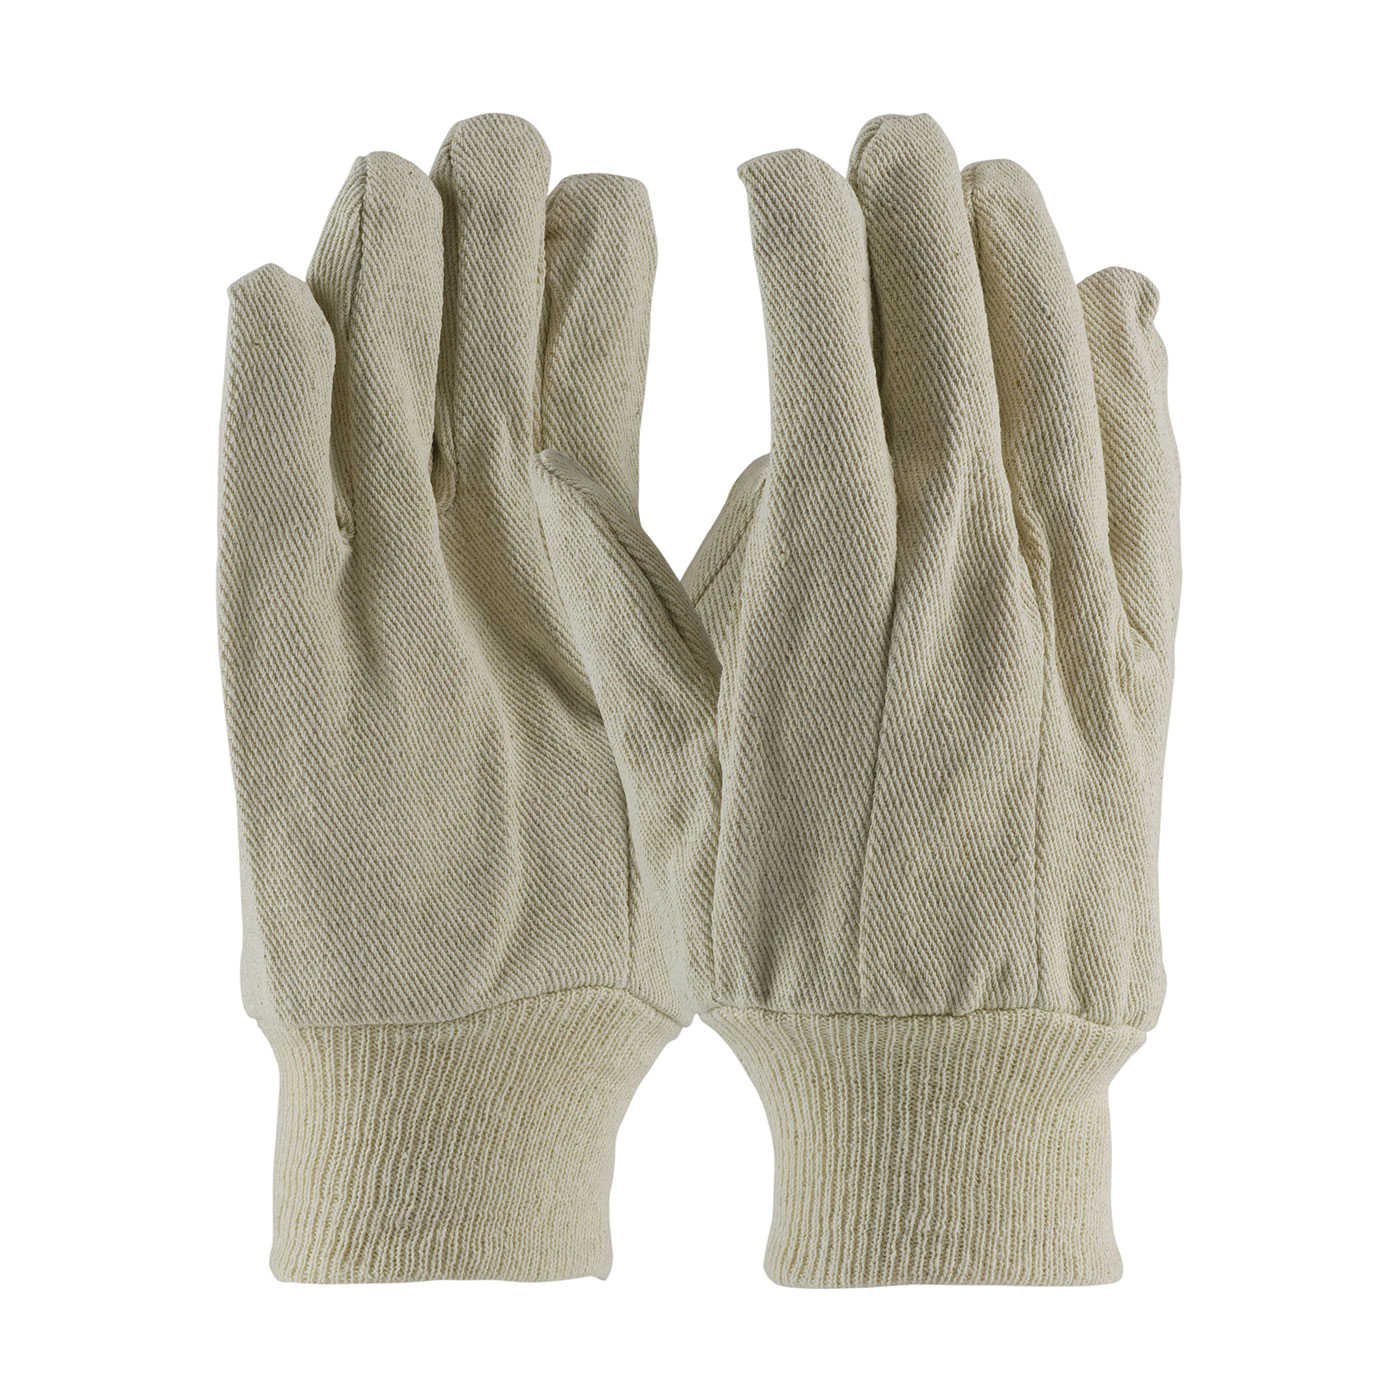 PIP® 90-910I Economy Grade Men's Single Palm General Purpose Gloves, Fabric/Work, Clute Cut/Full Finger/Straight Thumb Style, Universal, Cotton Palm, Cotton, Natural, Knit Wrist Cuff, Uncoated Coating, Resists: Abrasion and Cut, Canvas Lining